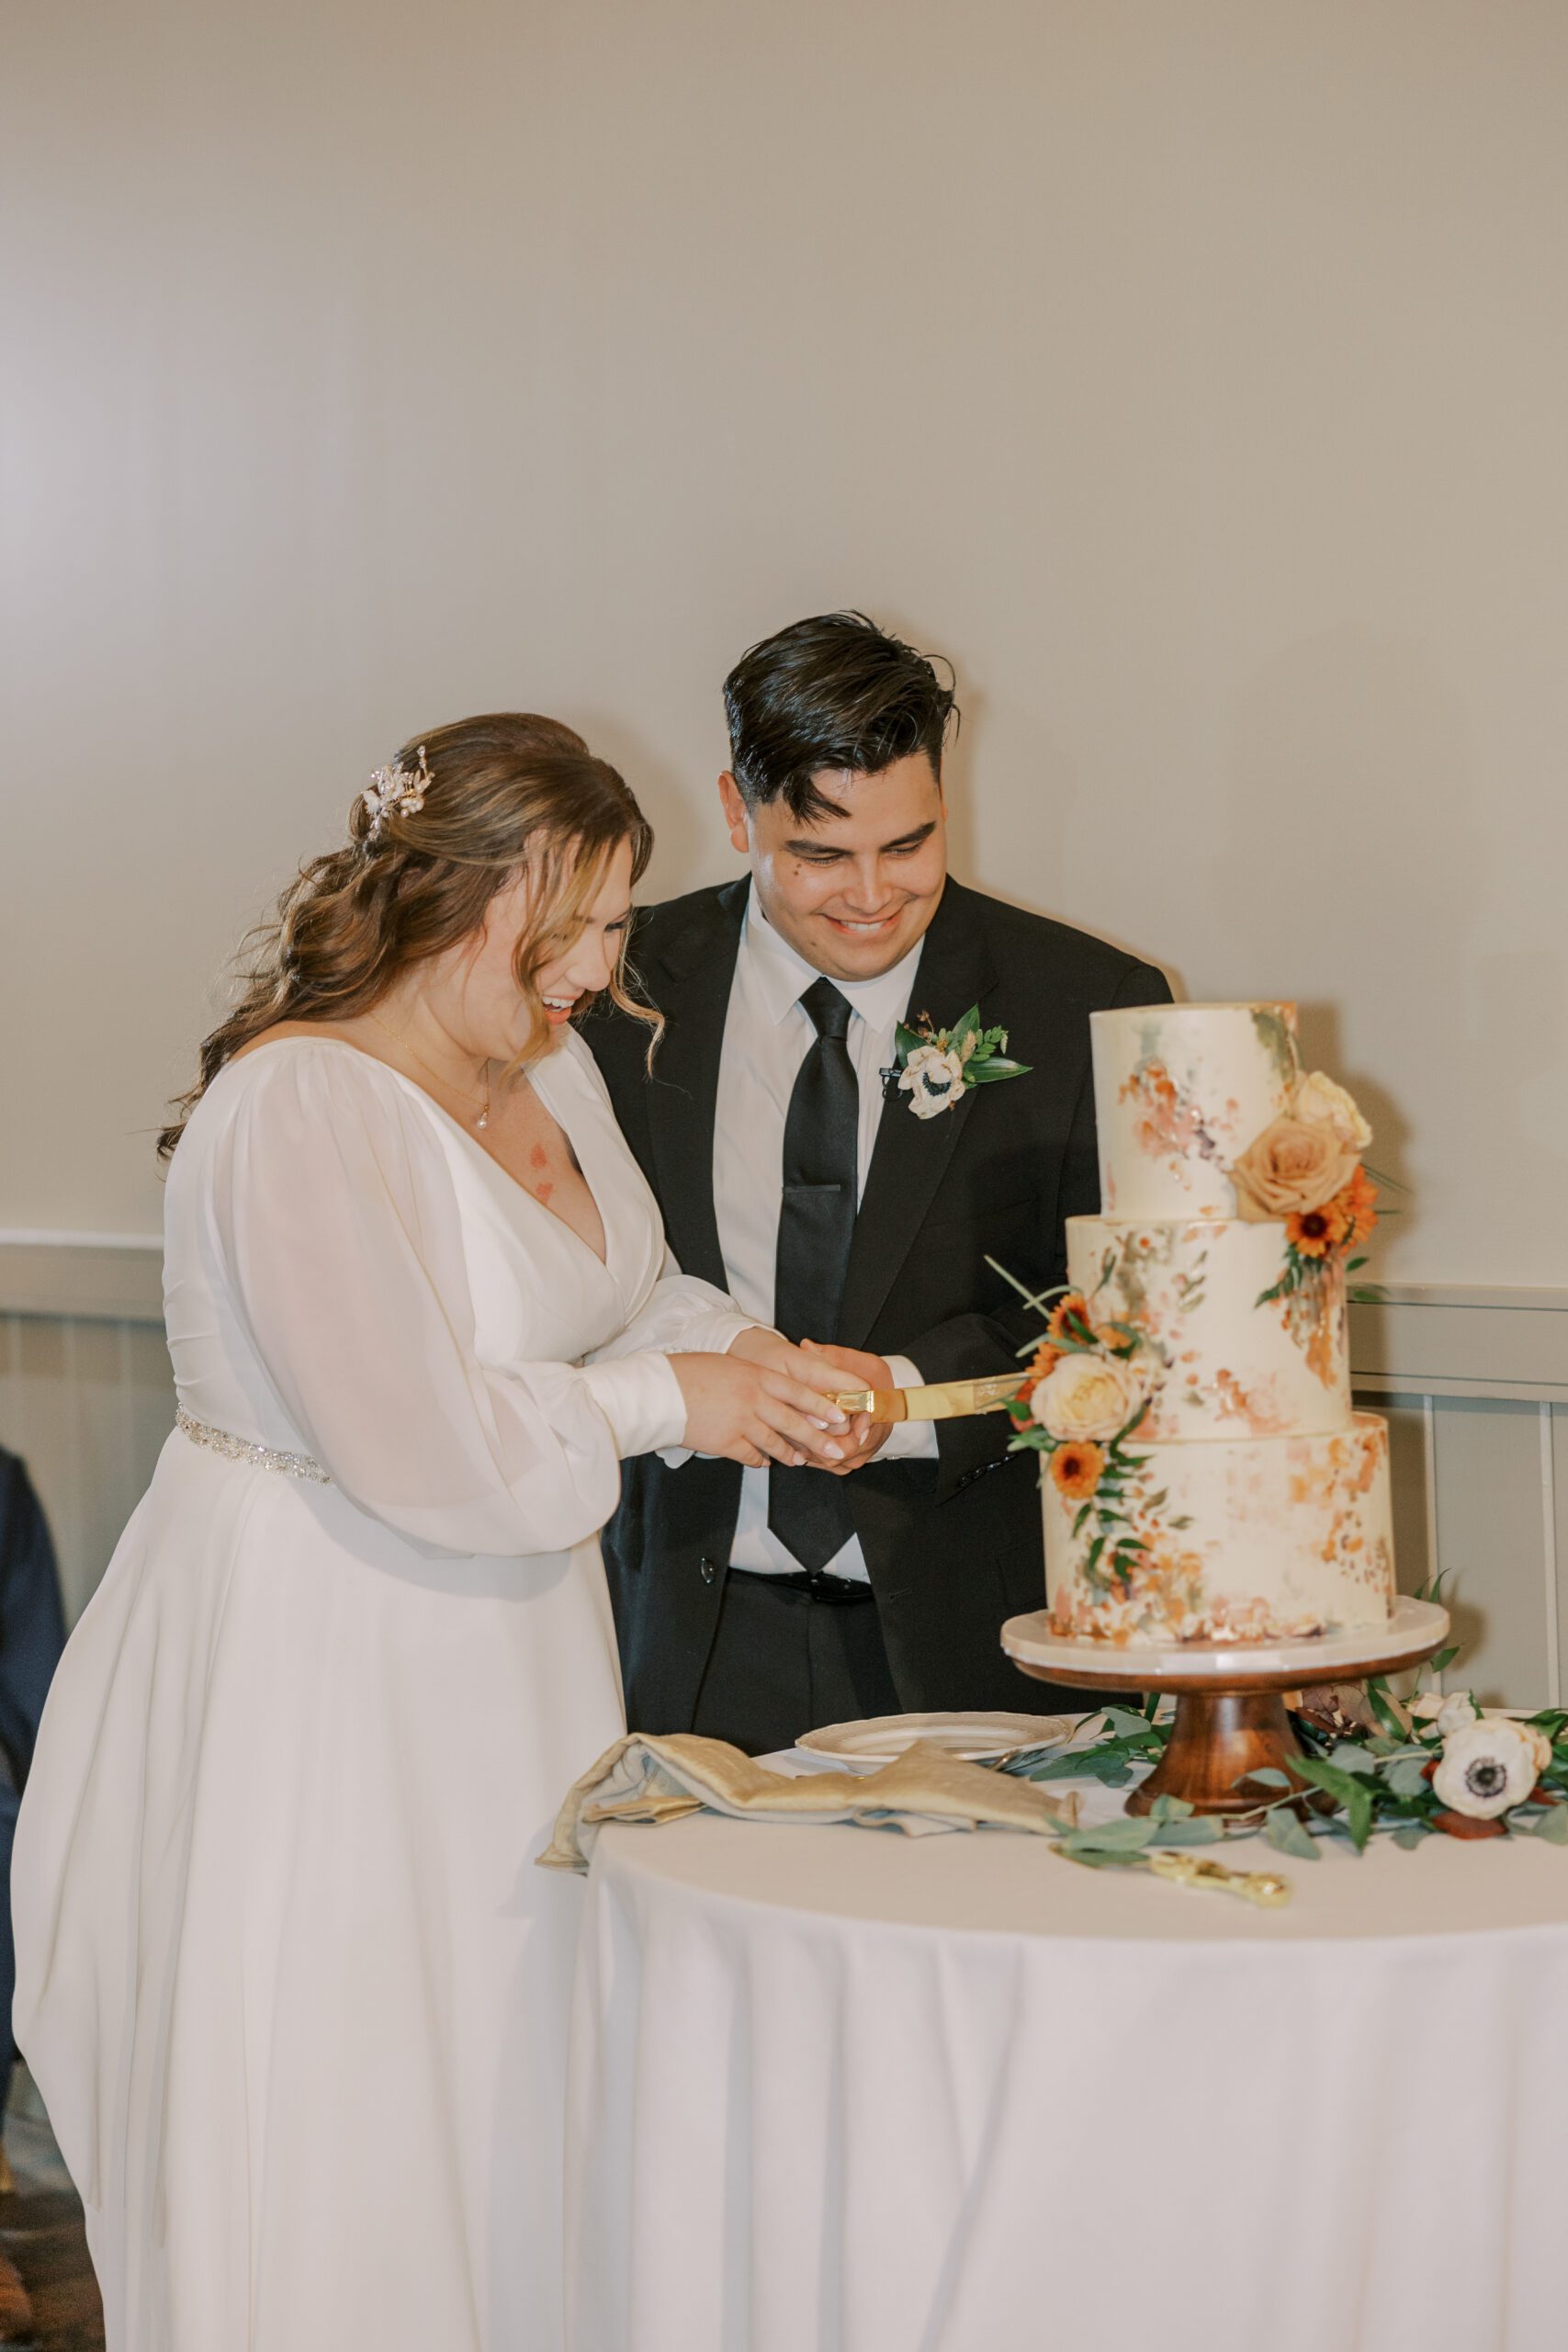 Bride and groom cutting their wedding cake that has orange and off white flowers on it